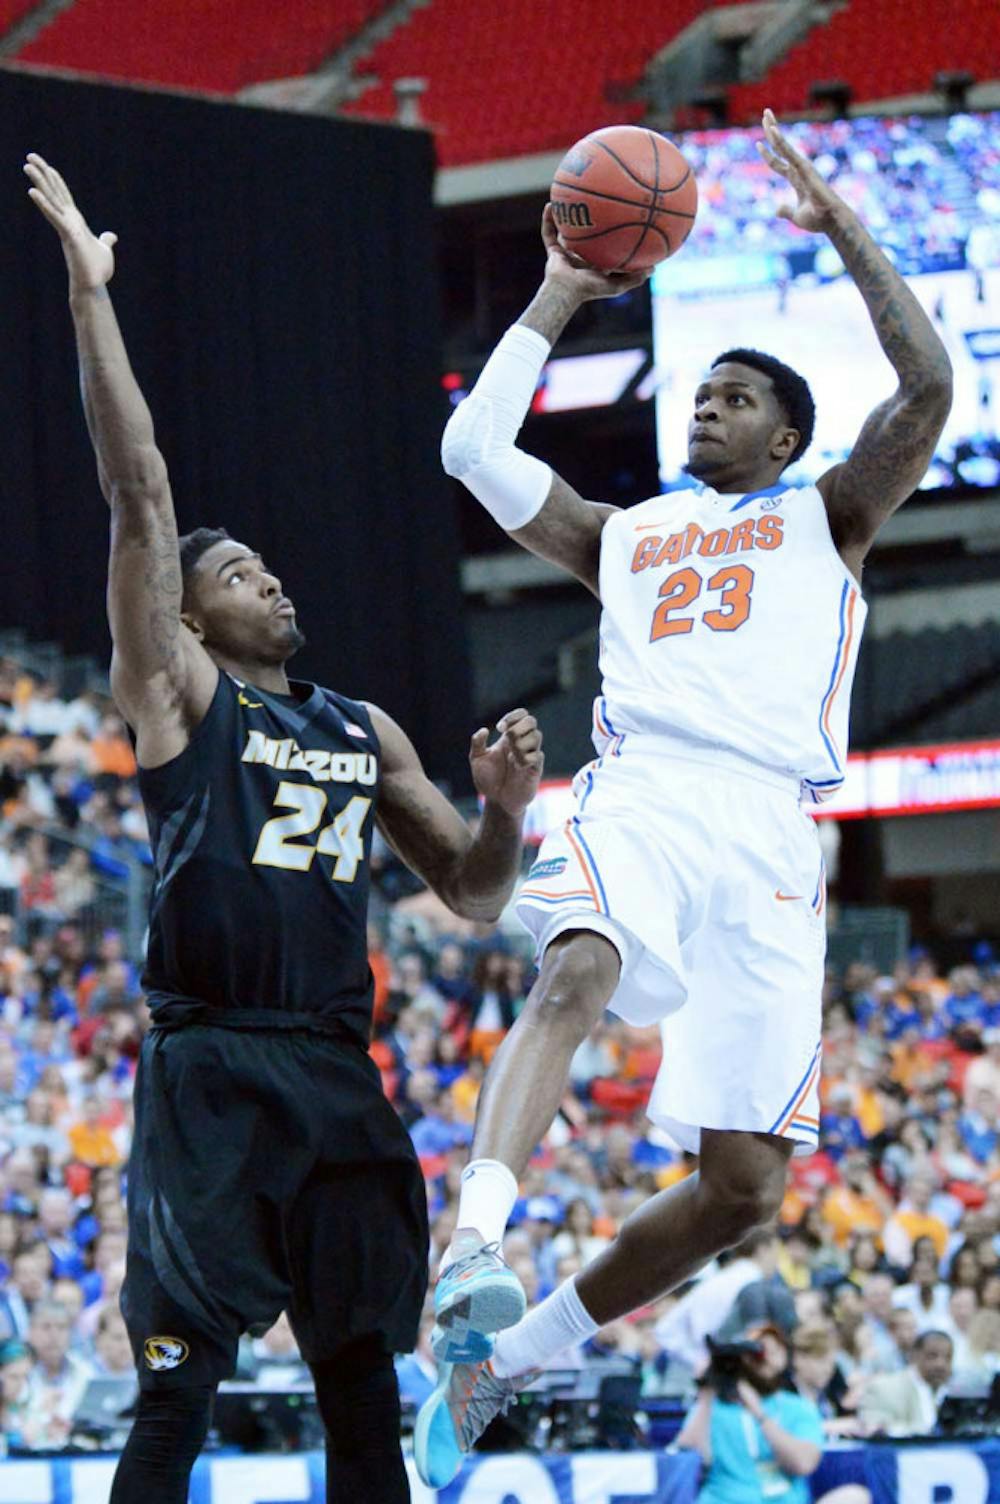 <p>Chris Walker attempts a layup during Florida's 72-49 win against Missouri on March 14 in the Georgia Dome in Atlanta.</p>